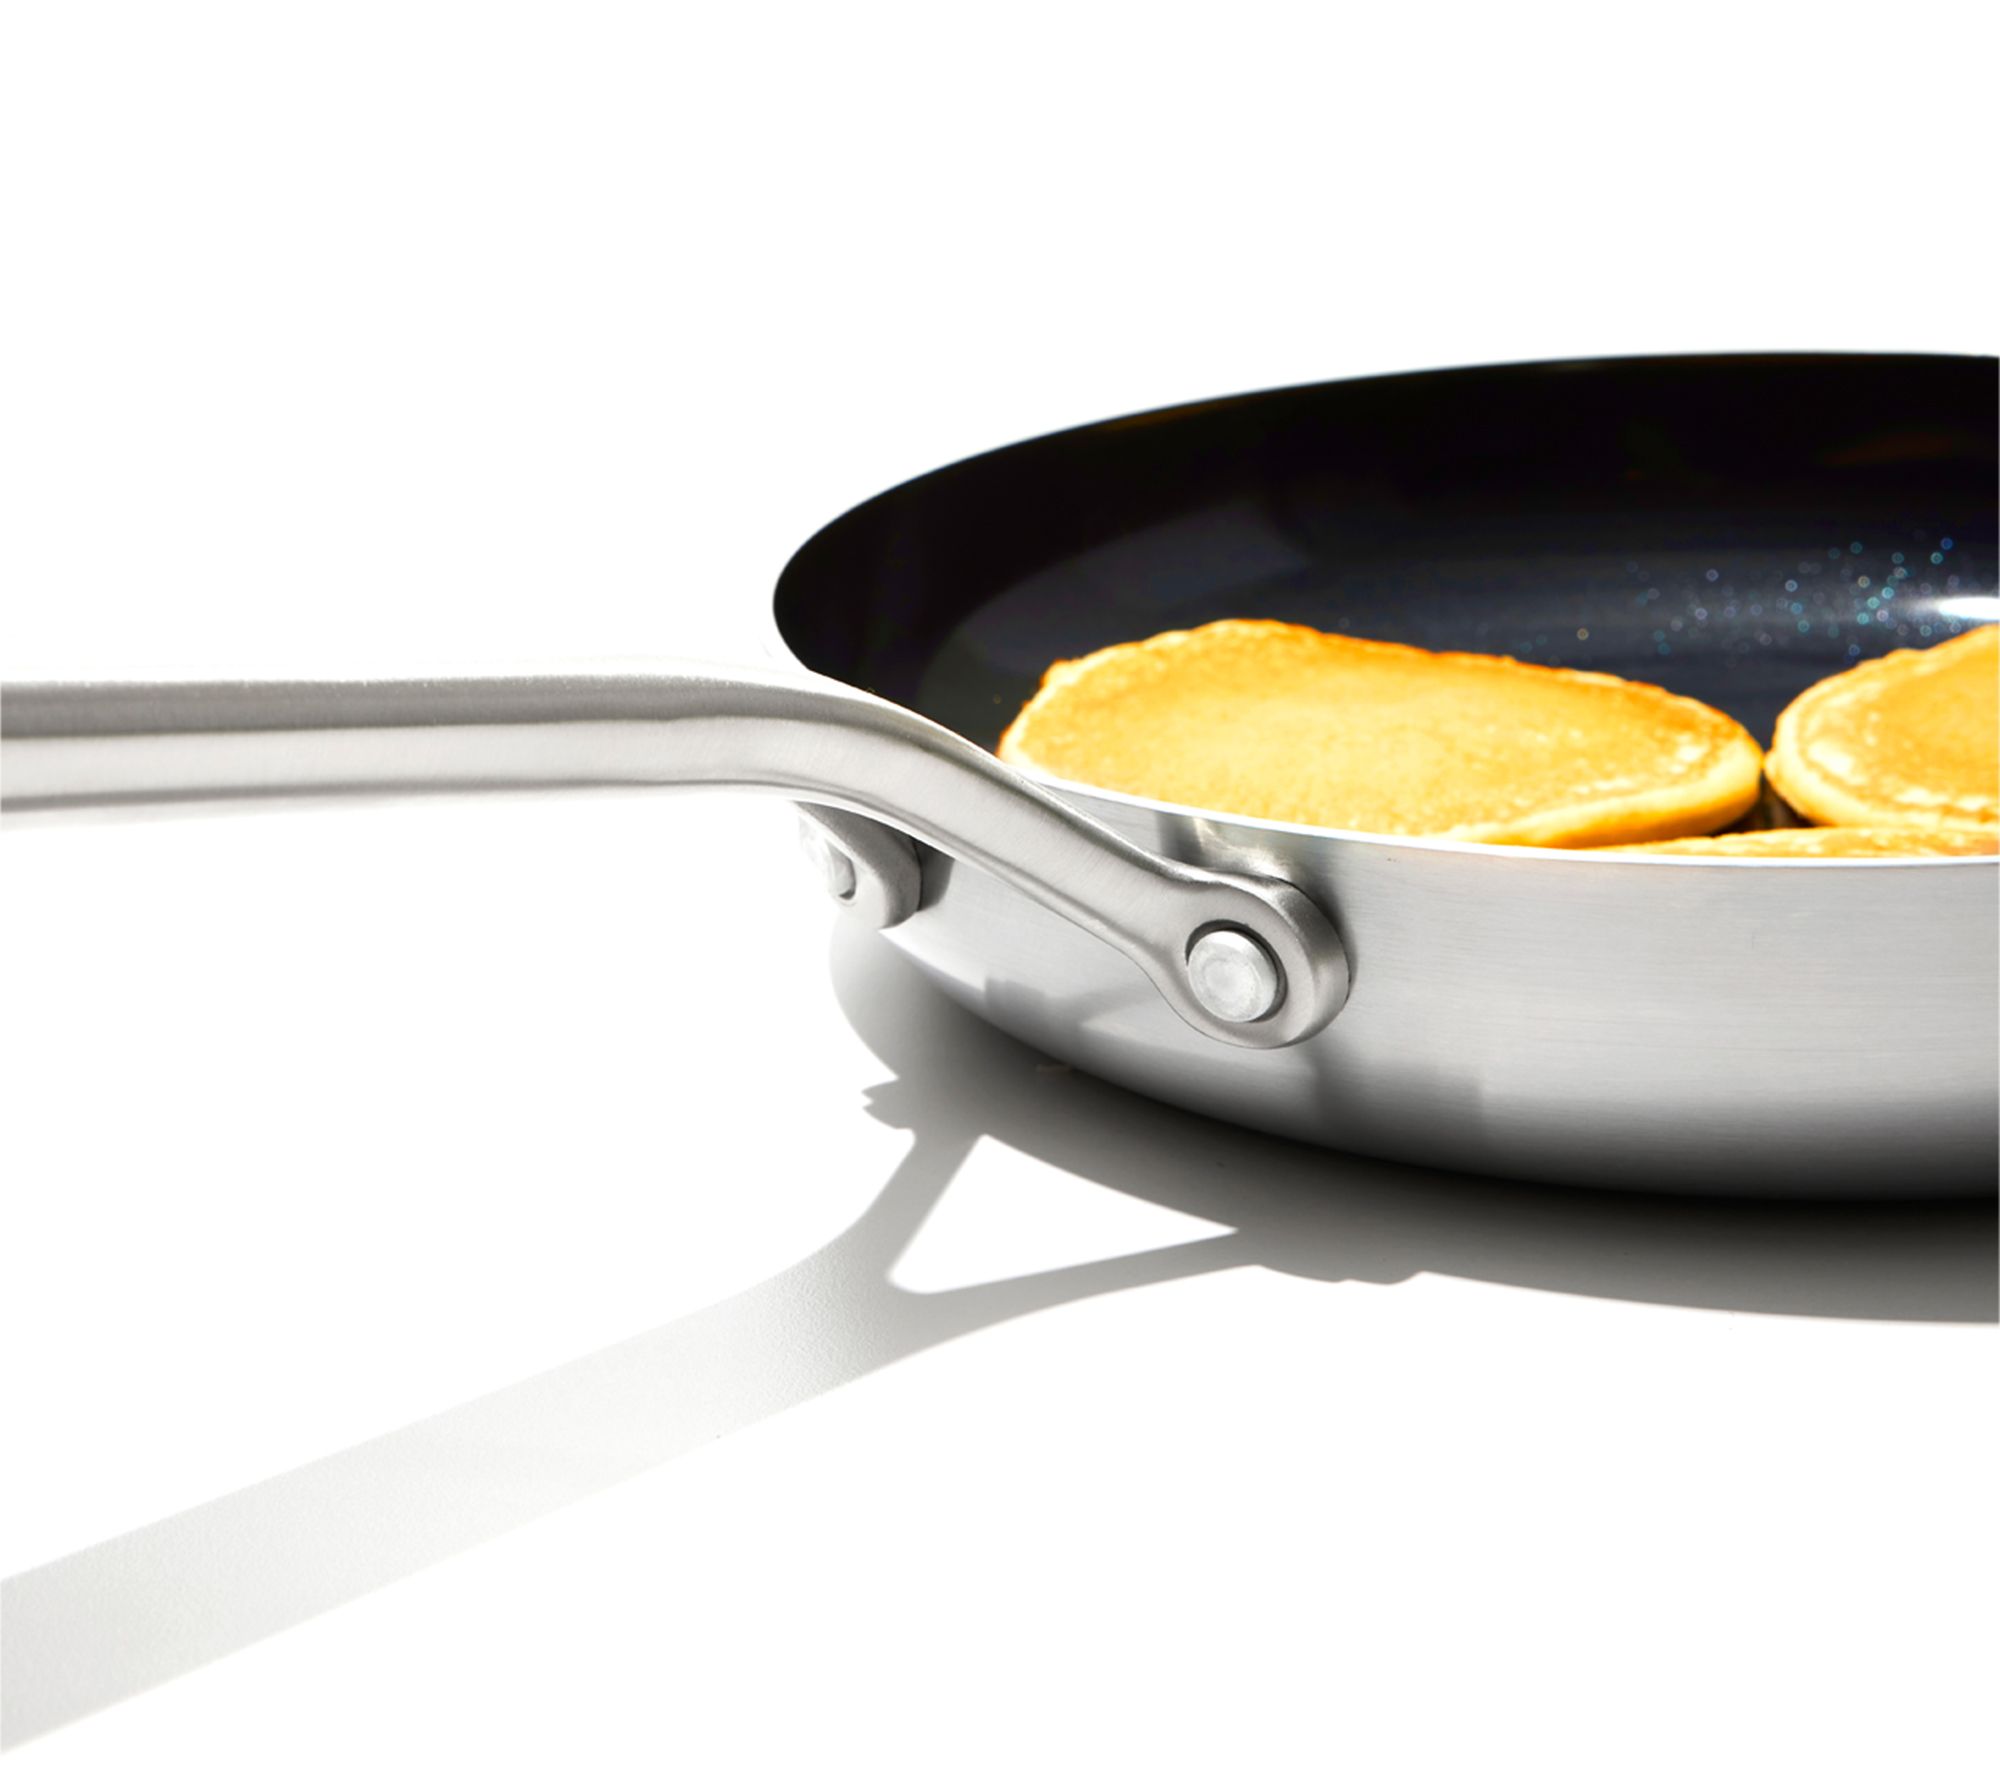 OXO Mira 3-Ply Stainless Steel Non-Stick Frying Pan, 10